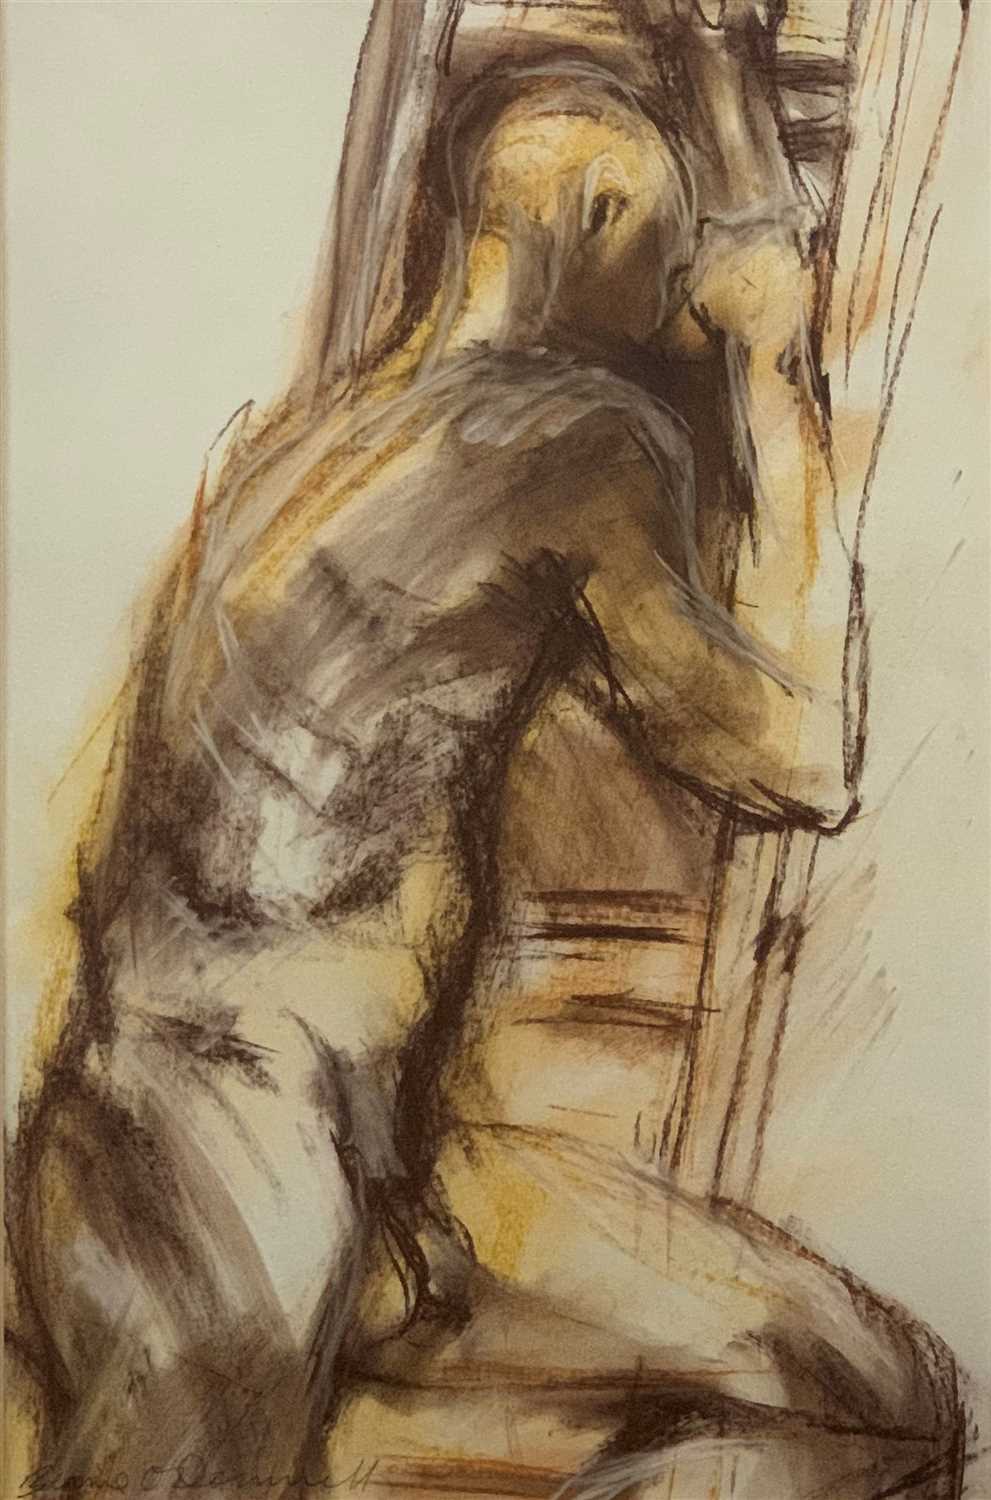 Lot 576 - NUDE STUDY II, A PASTEL BY BERNIE O'DONNELL